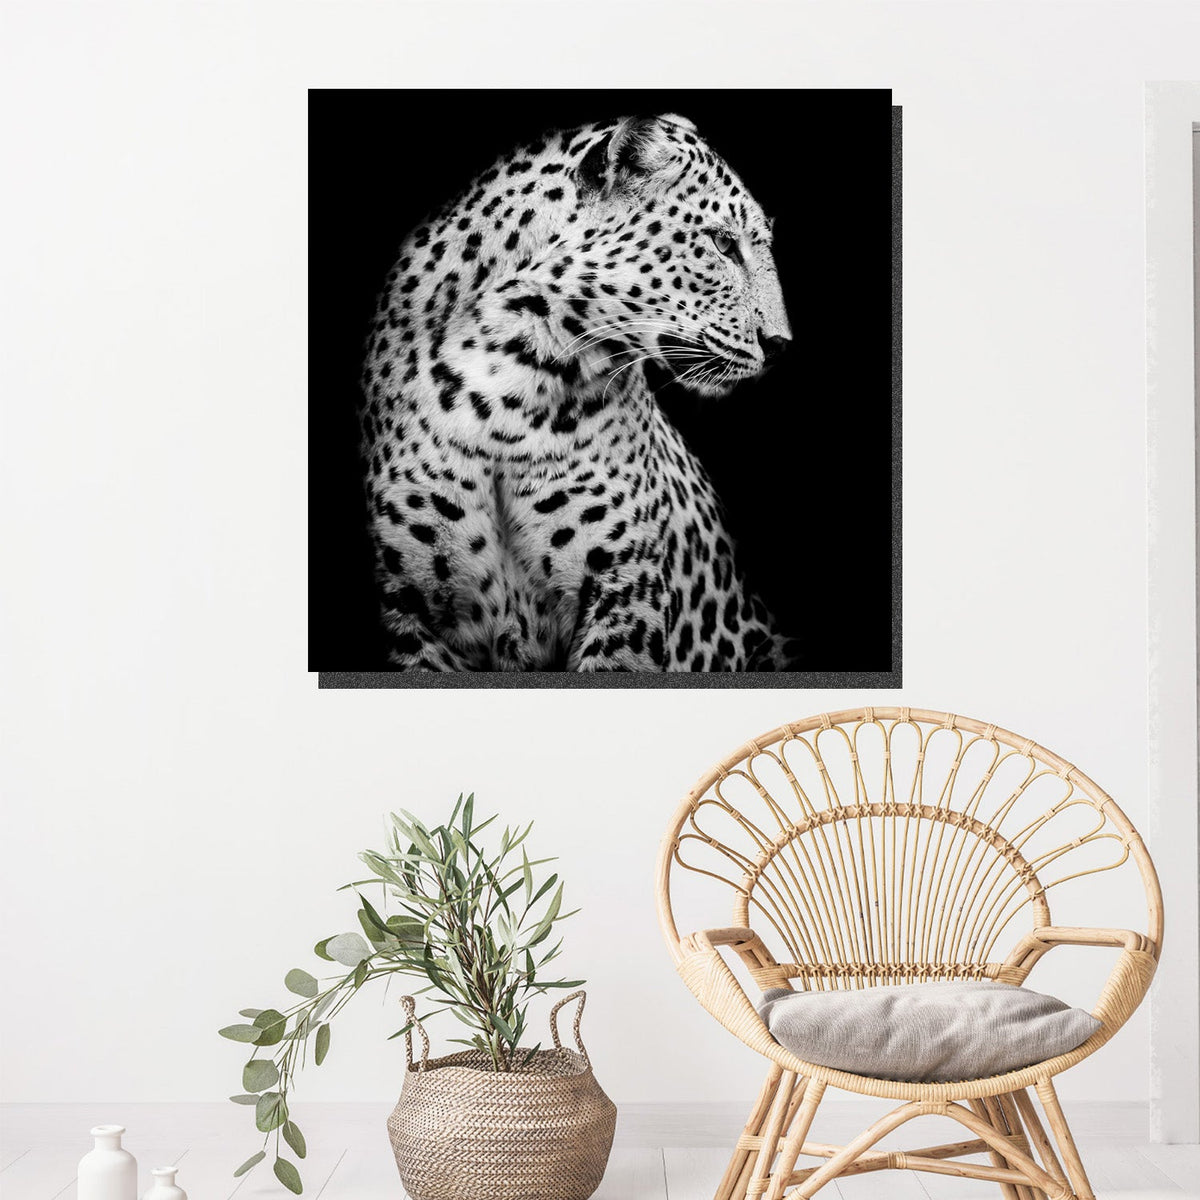 https://cdn.shopify.com/s/files/1/0387/9986/8044/products/LeopardSideViewCanvasArtprintStretched-3.jpg